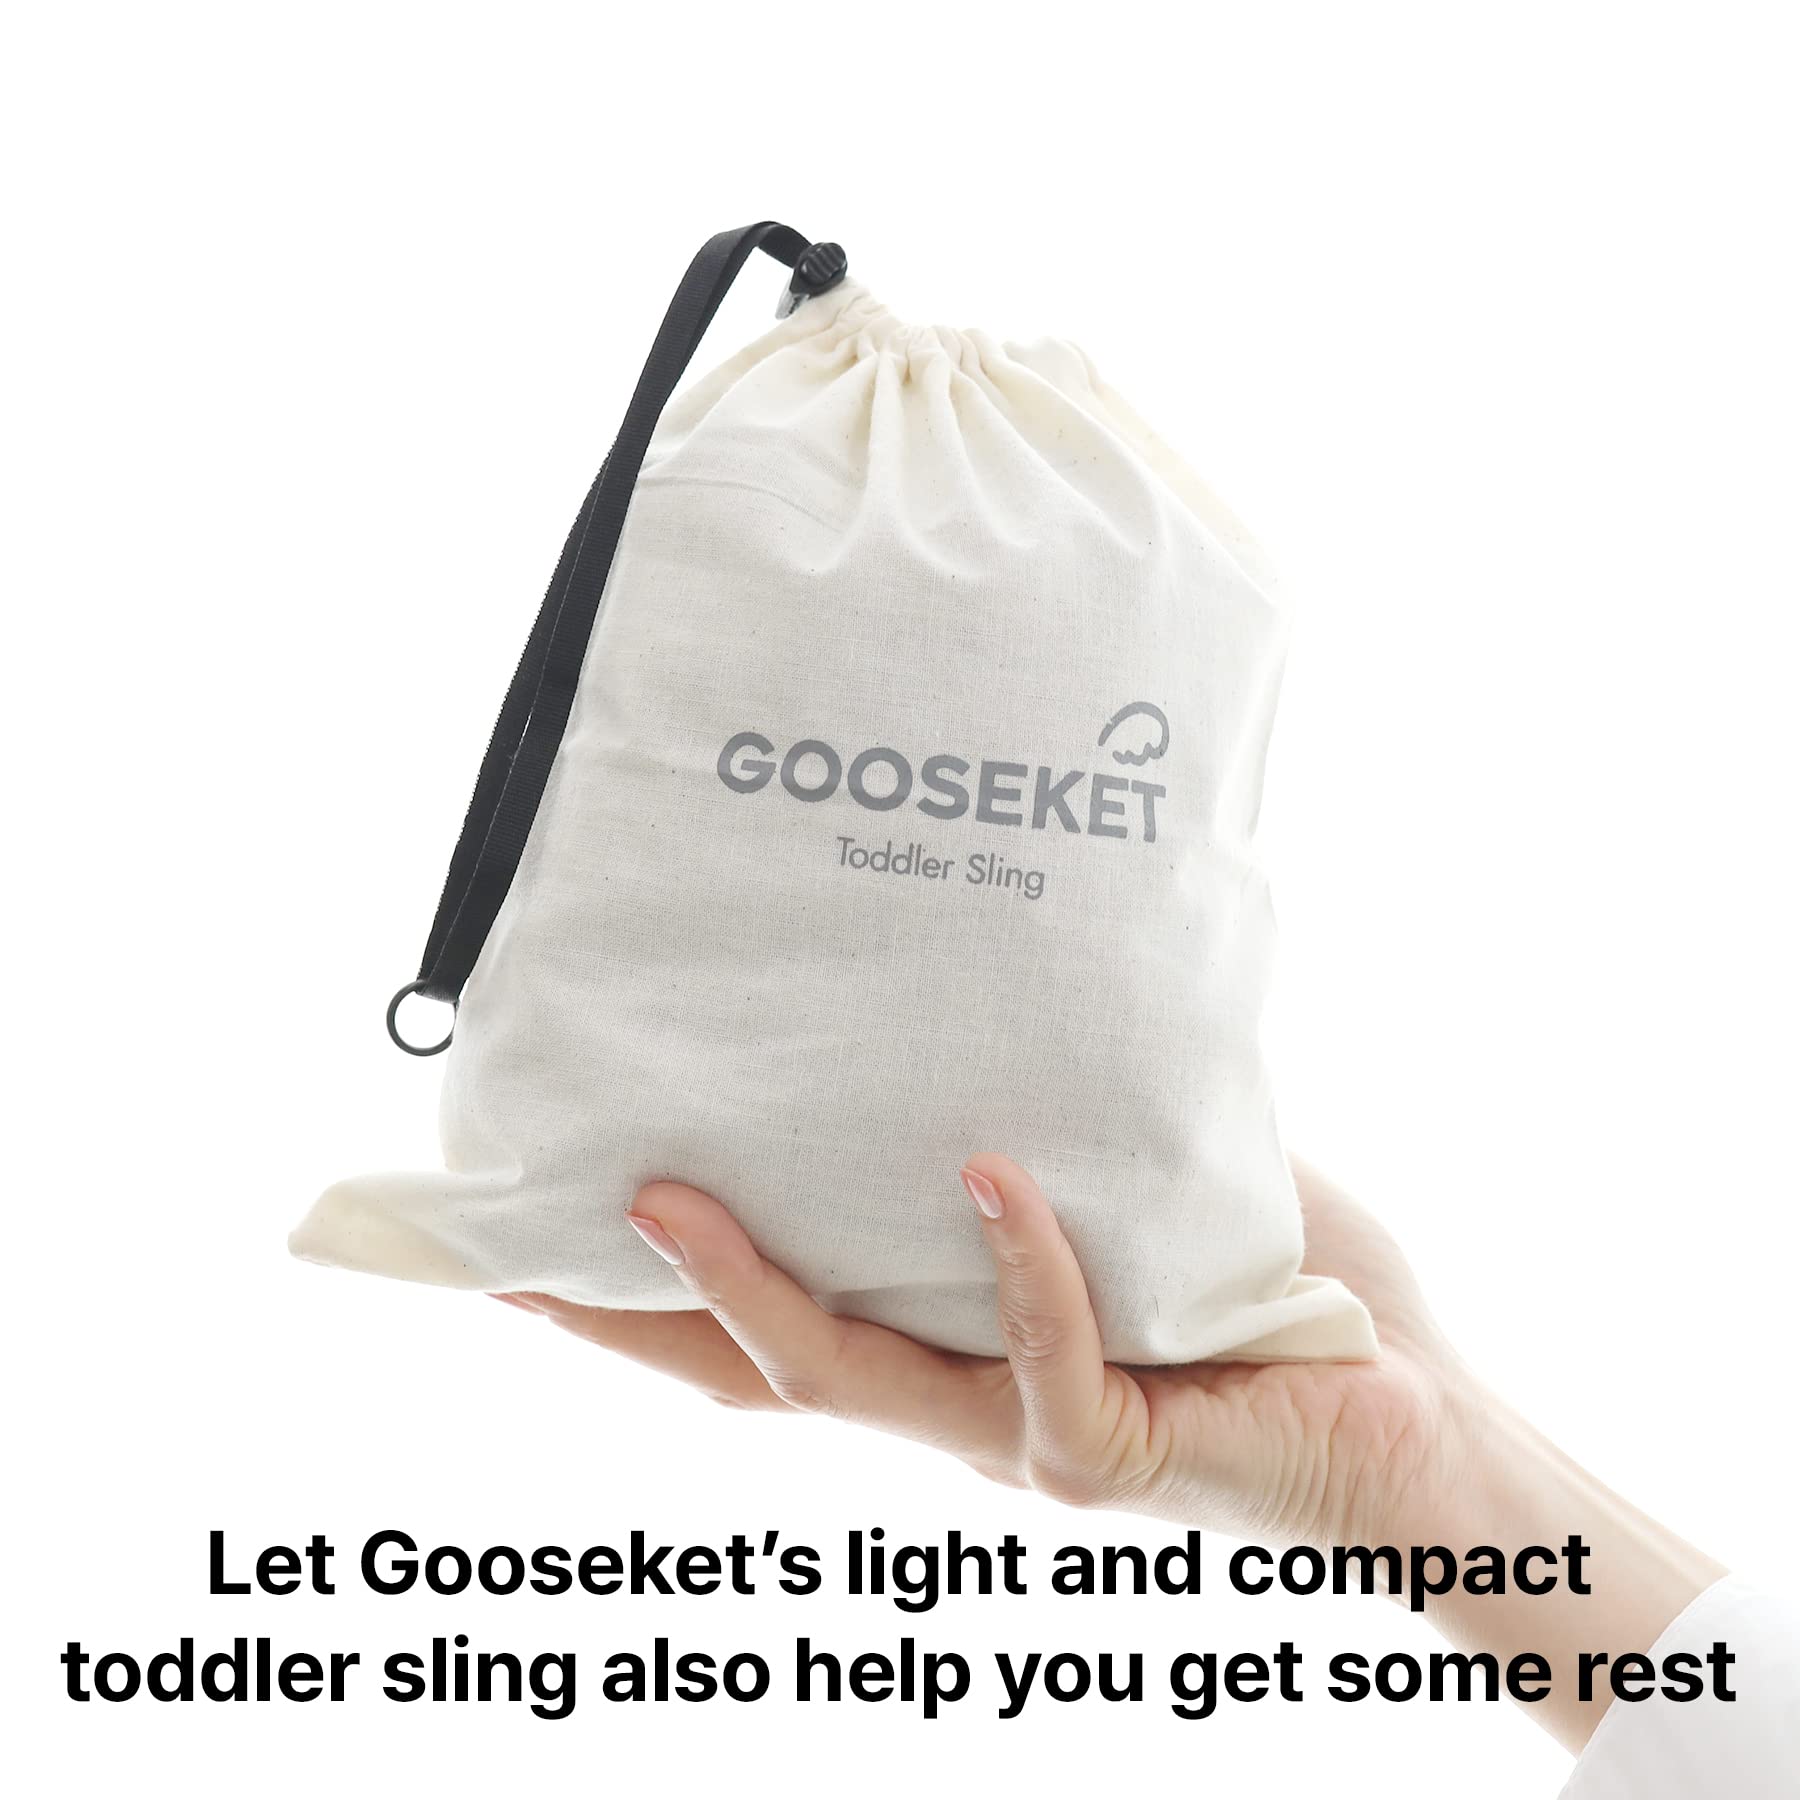 GOOSEKET Toddler Sling/Original/Cotton Baby Carrier/Compact hipseat/Infants to 44 lbs Toddlers/Sleep (Black)